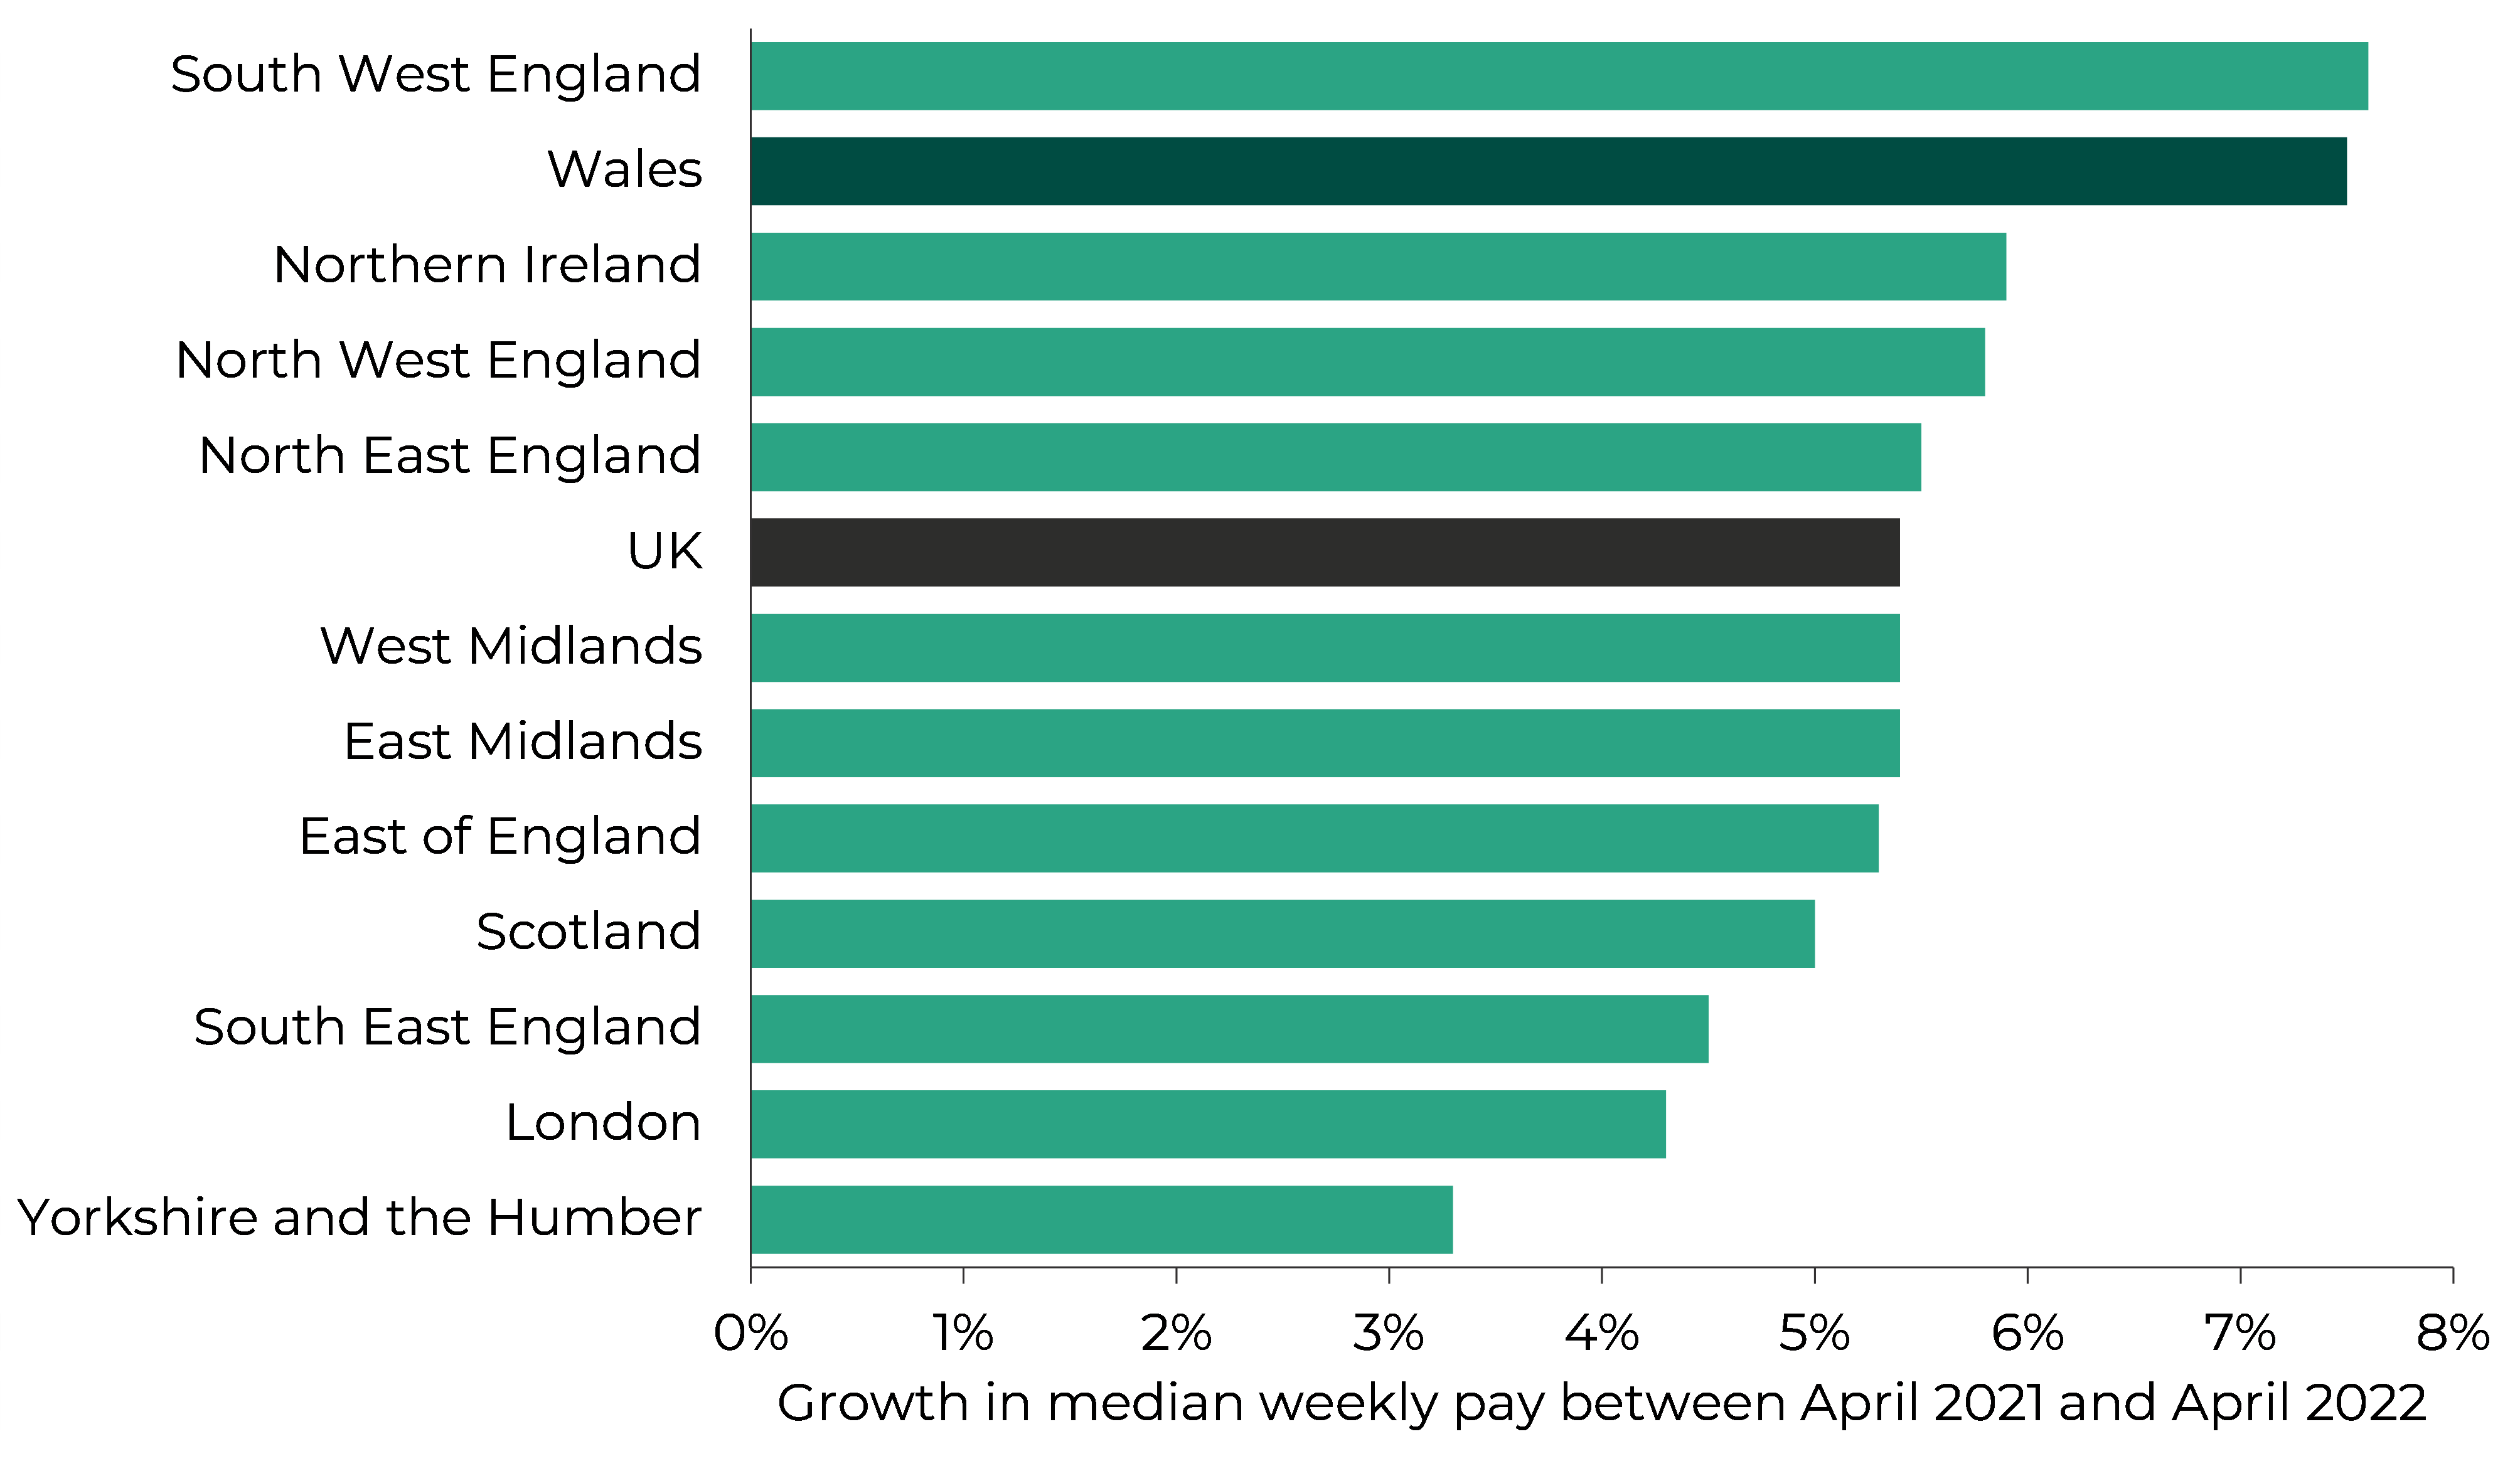 Graph showing the percentage change in gross median weekly pay between April 2021 and April 2022 in the devolved nations and English regions. While gross median weekly pay has increased by more in Wales than many other parts of the UK, it has still increased below inflation.